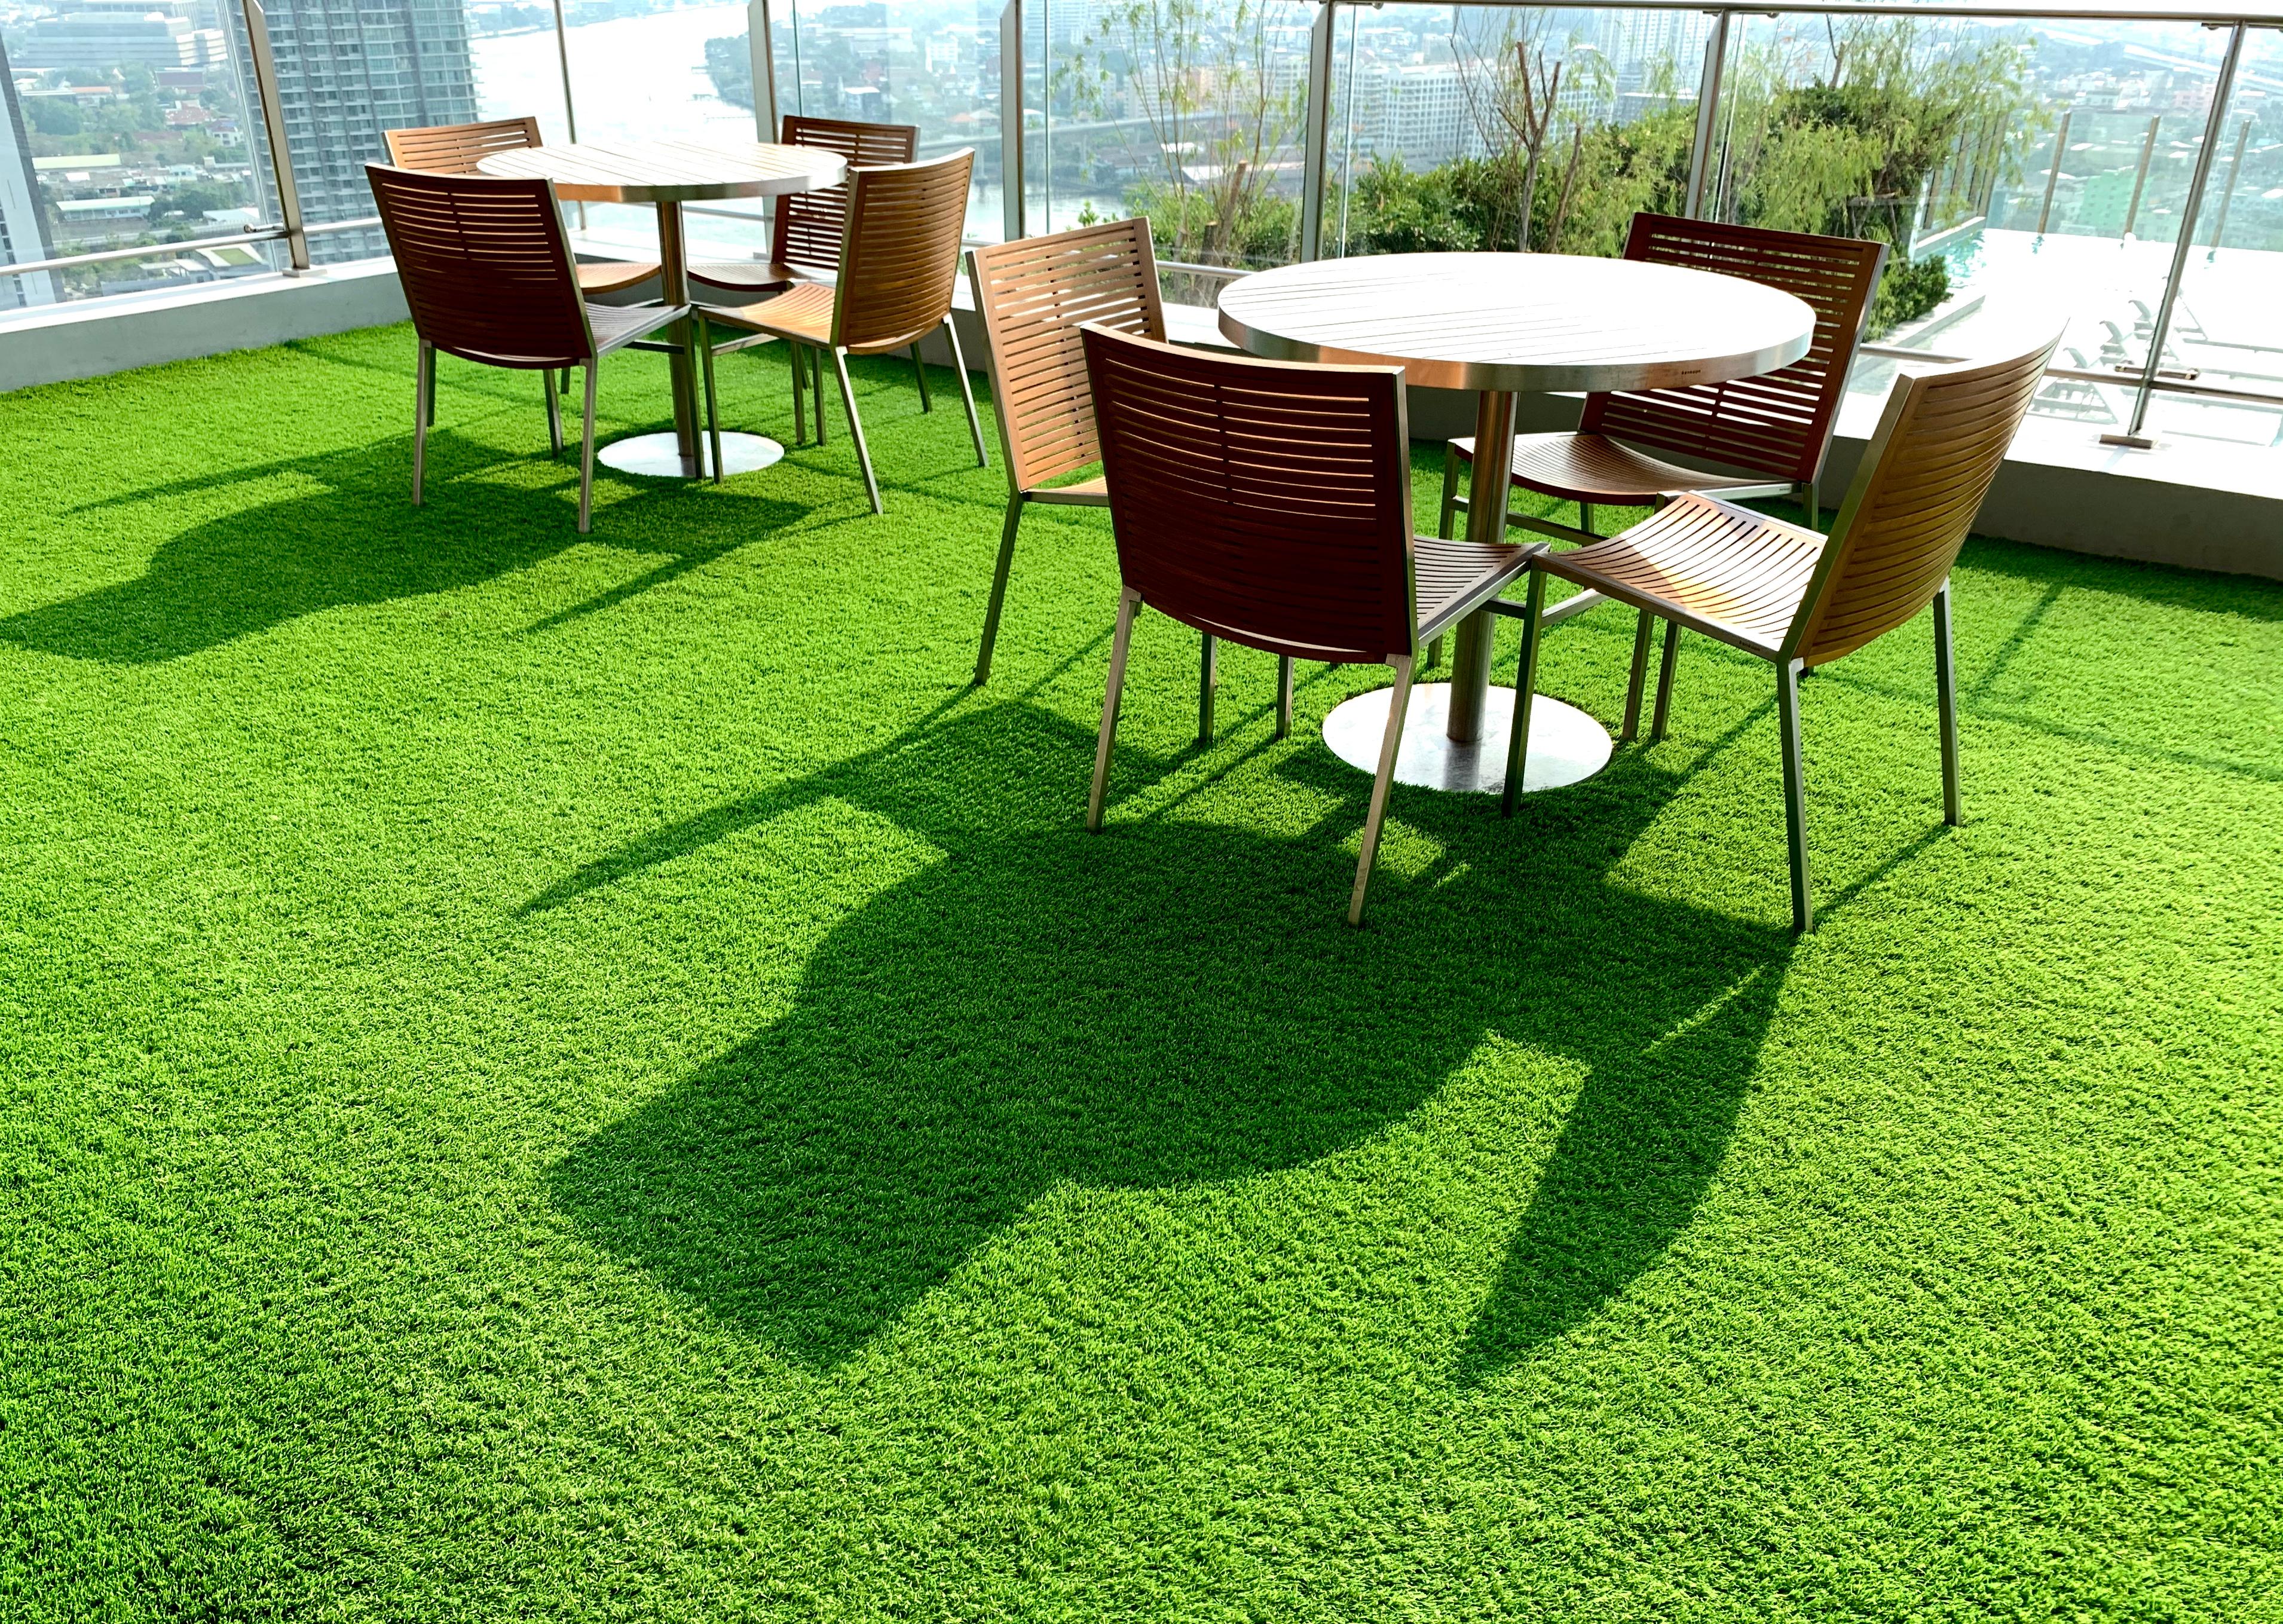 Does Artificial Grass Add Value to Your Home?